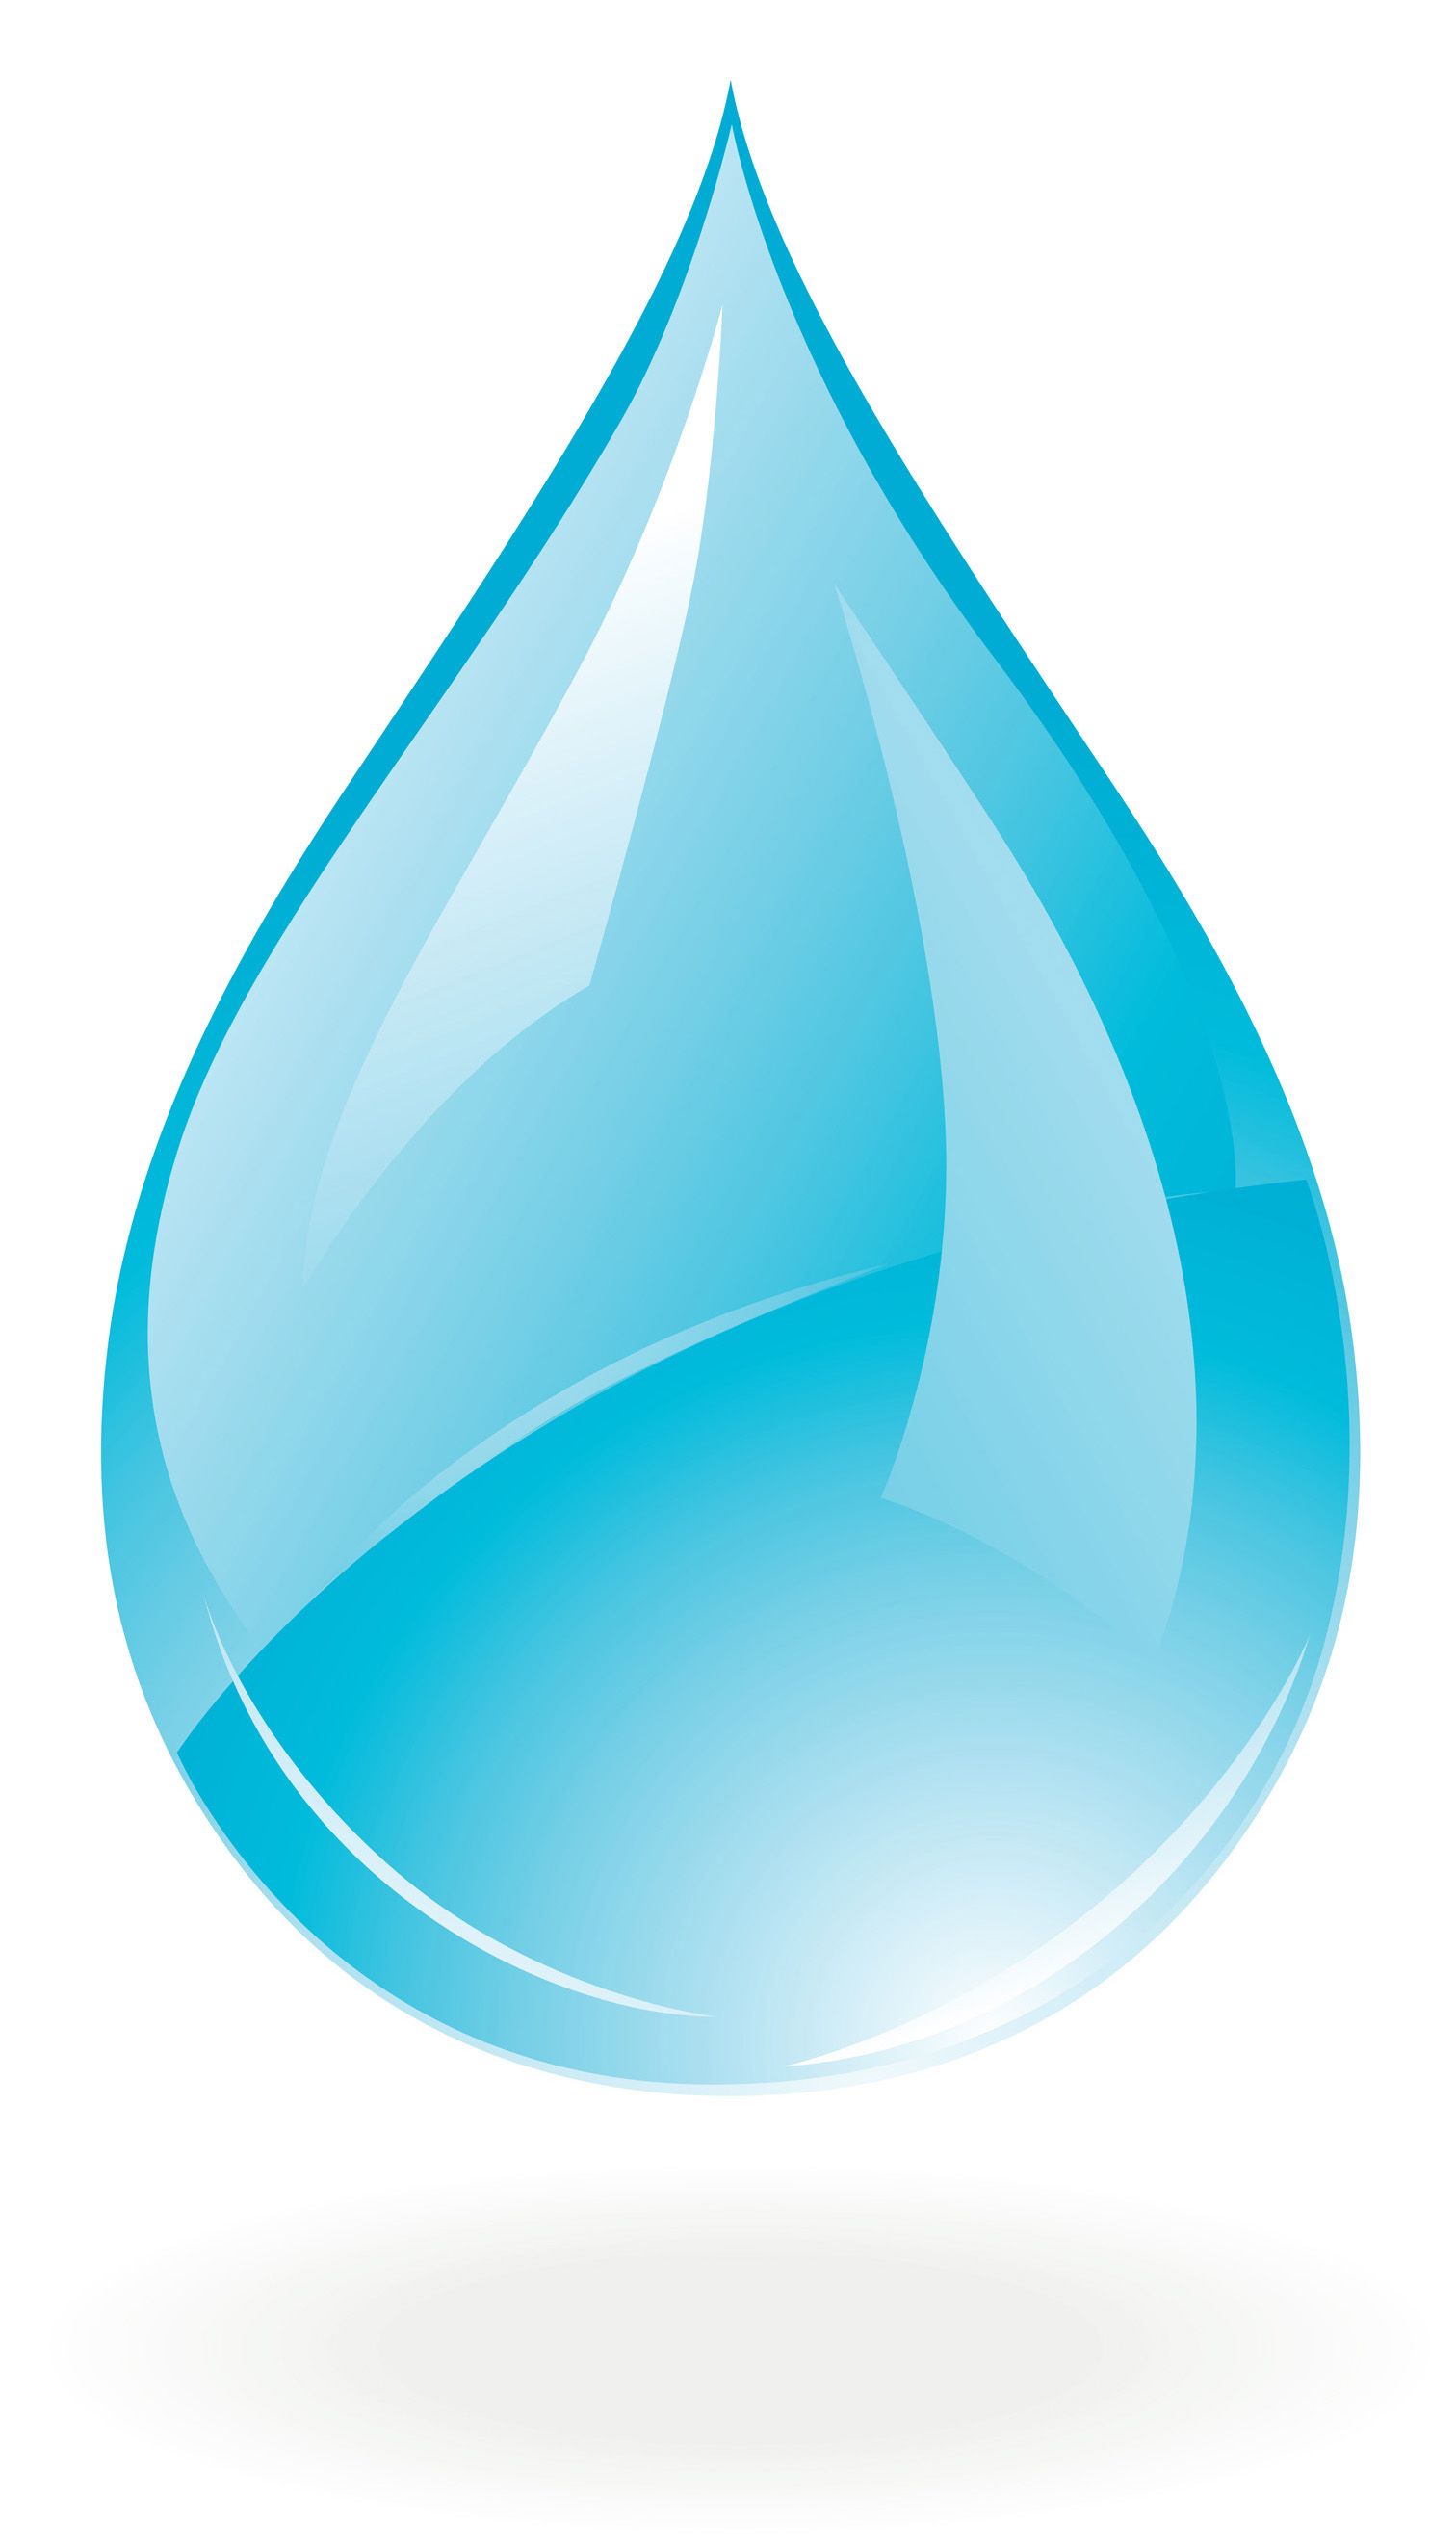 Water Drop Psd Clipart | Planning makes me Happy | Pinterest | Water ...